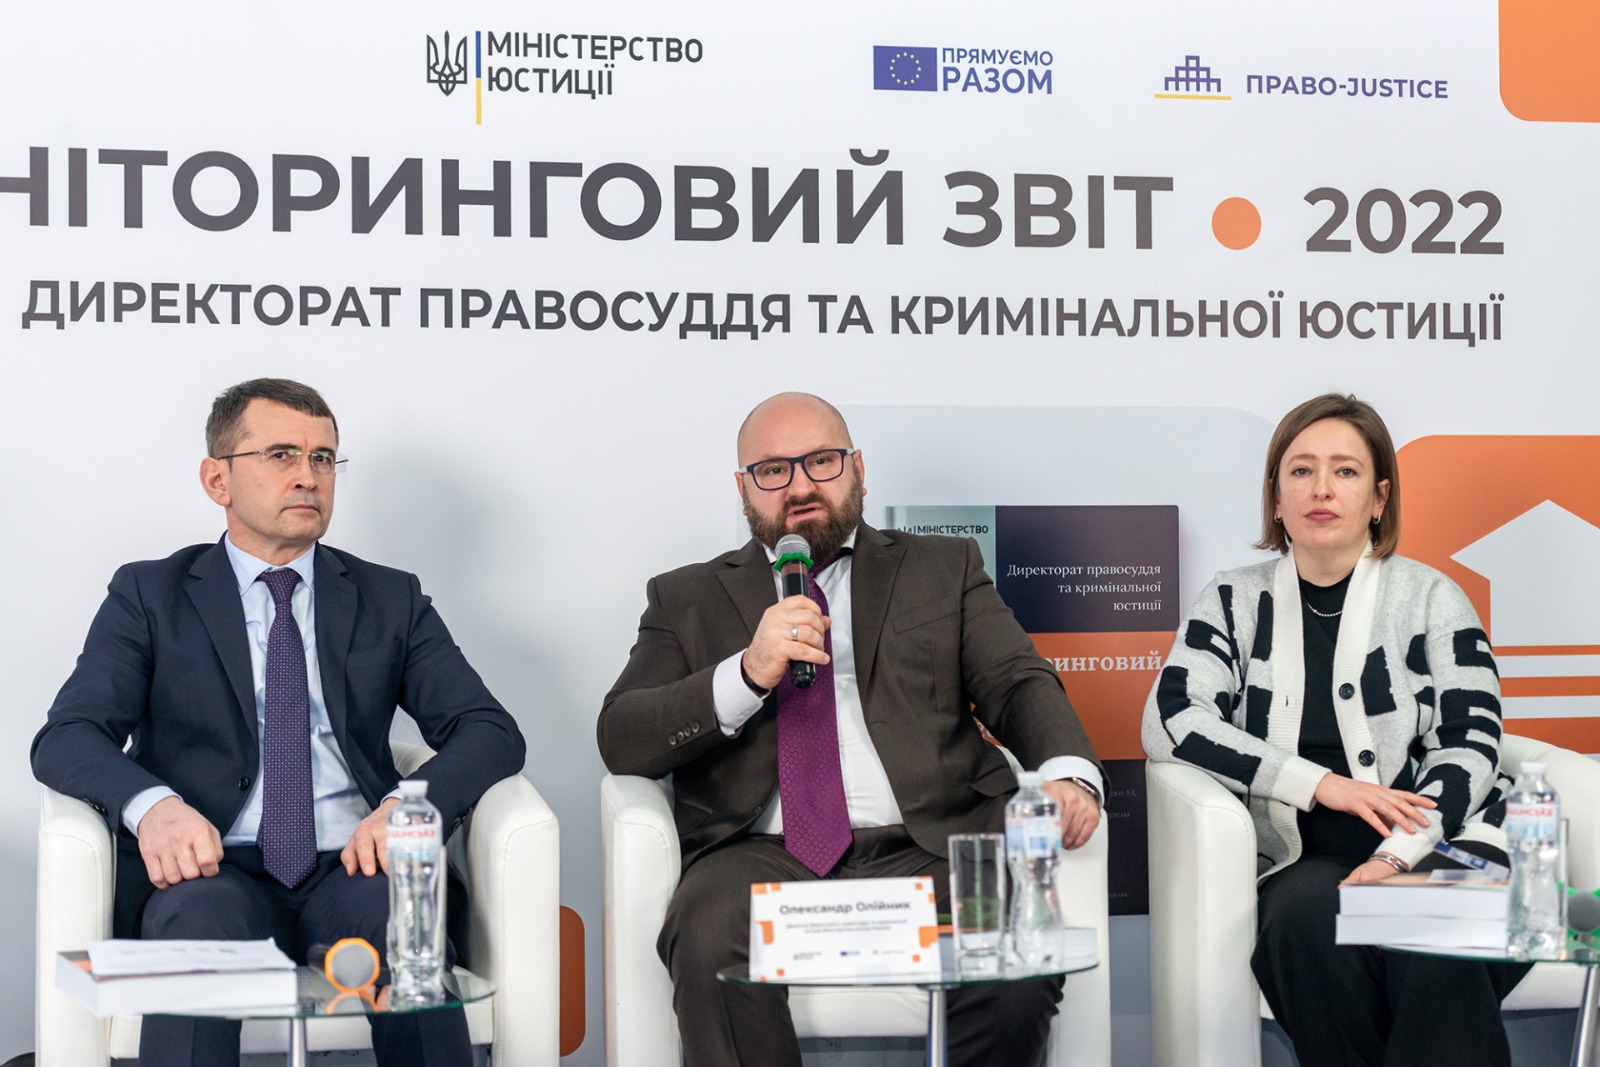 With the support of the EU Project Pravo-Justice, the monitoring report by the Ministry of Justice of Ukraine on bankruptcy presented